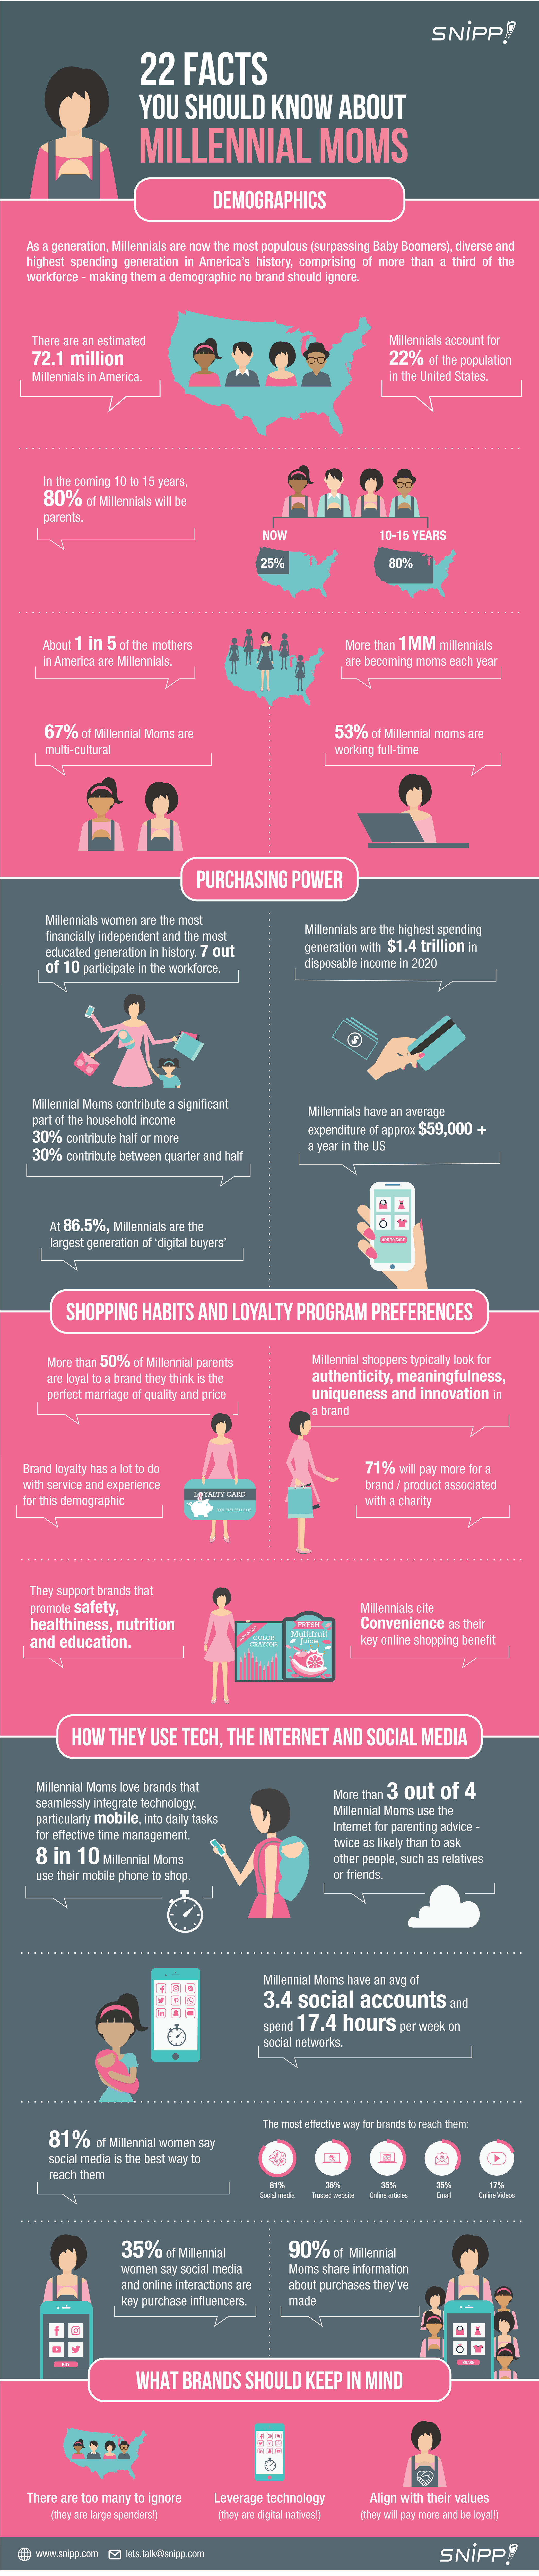 Snipp-Resources-Infographic-22-Things-You-Should-Know-About-Millenial-Moms-02